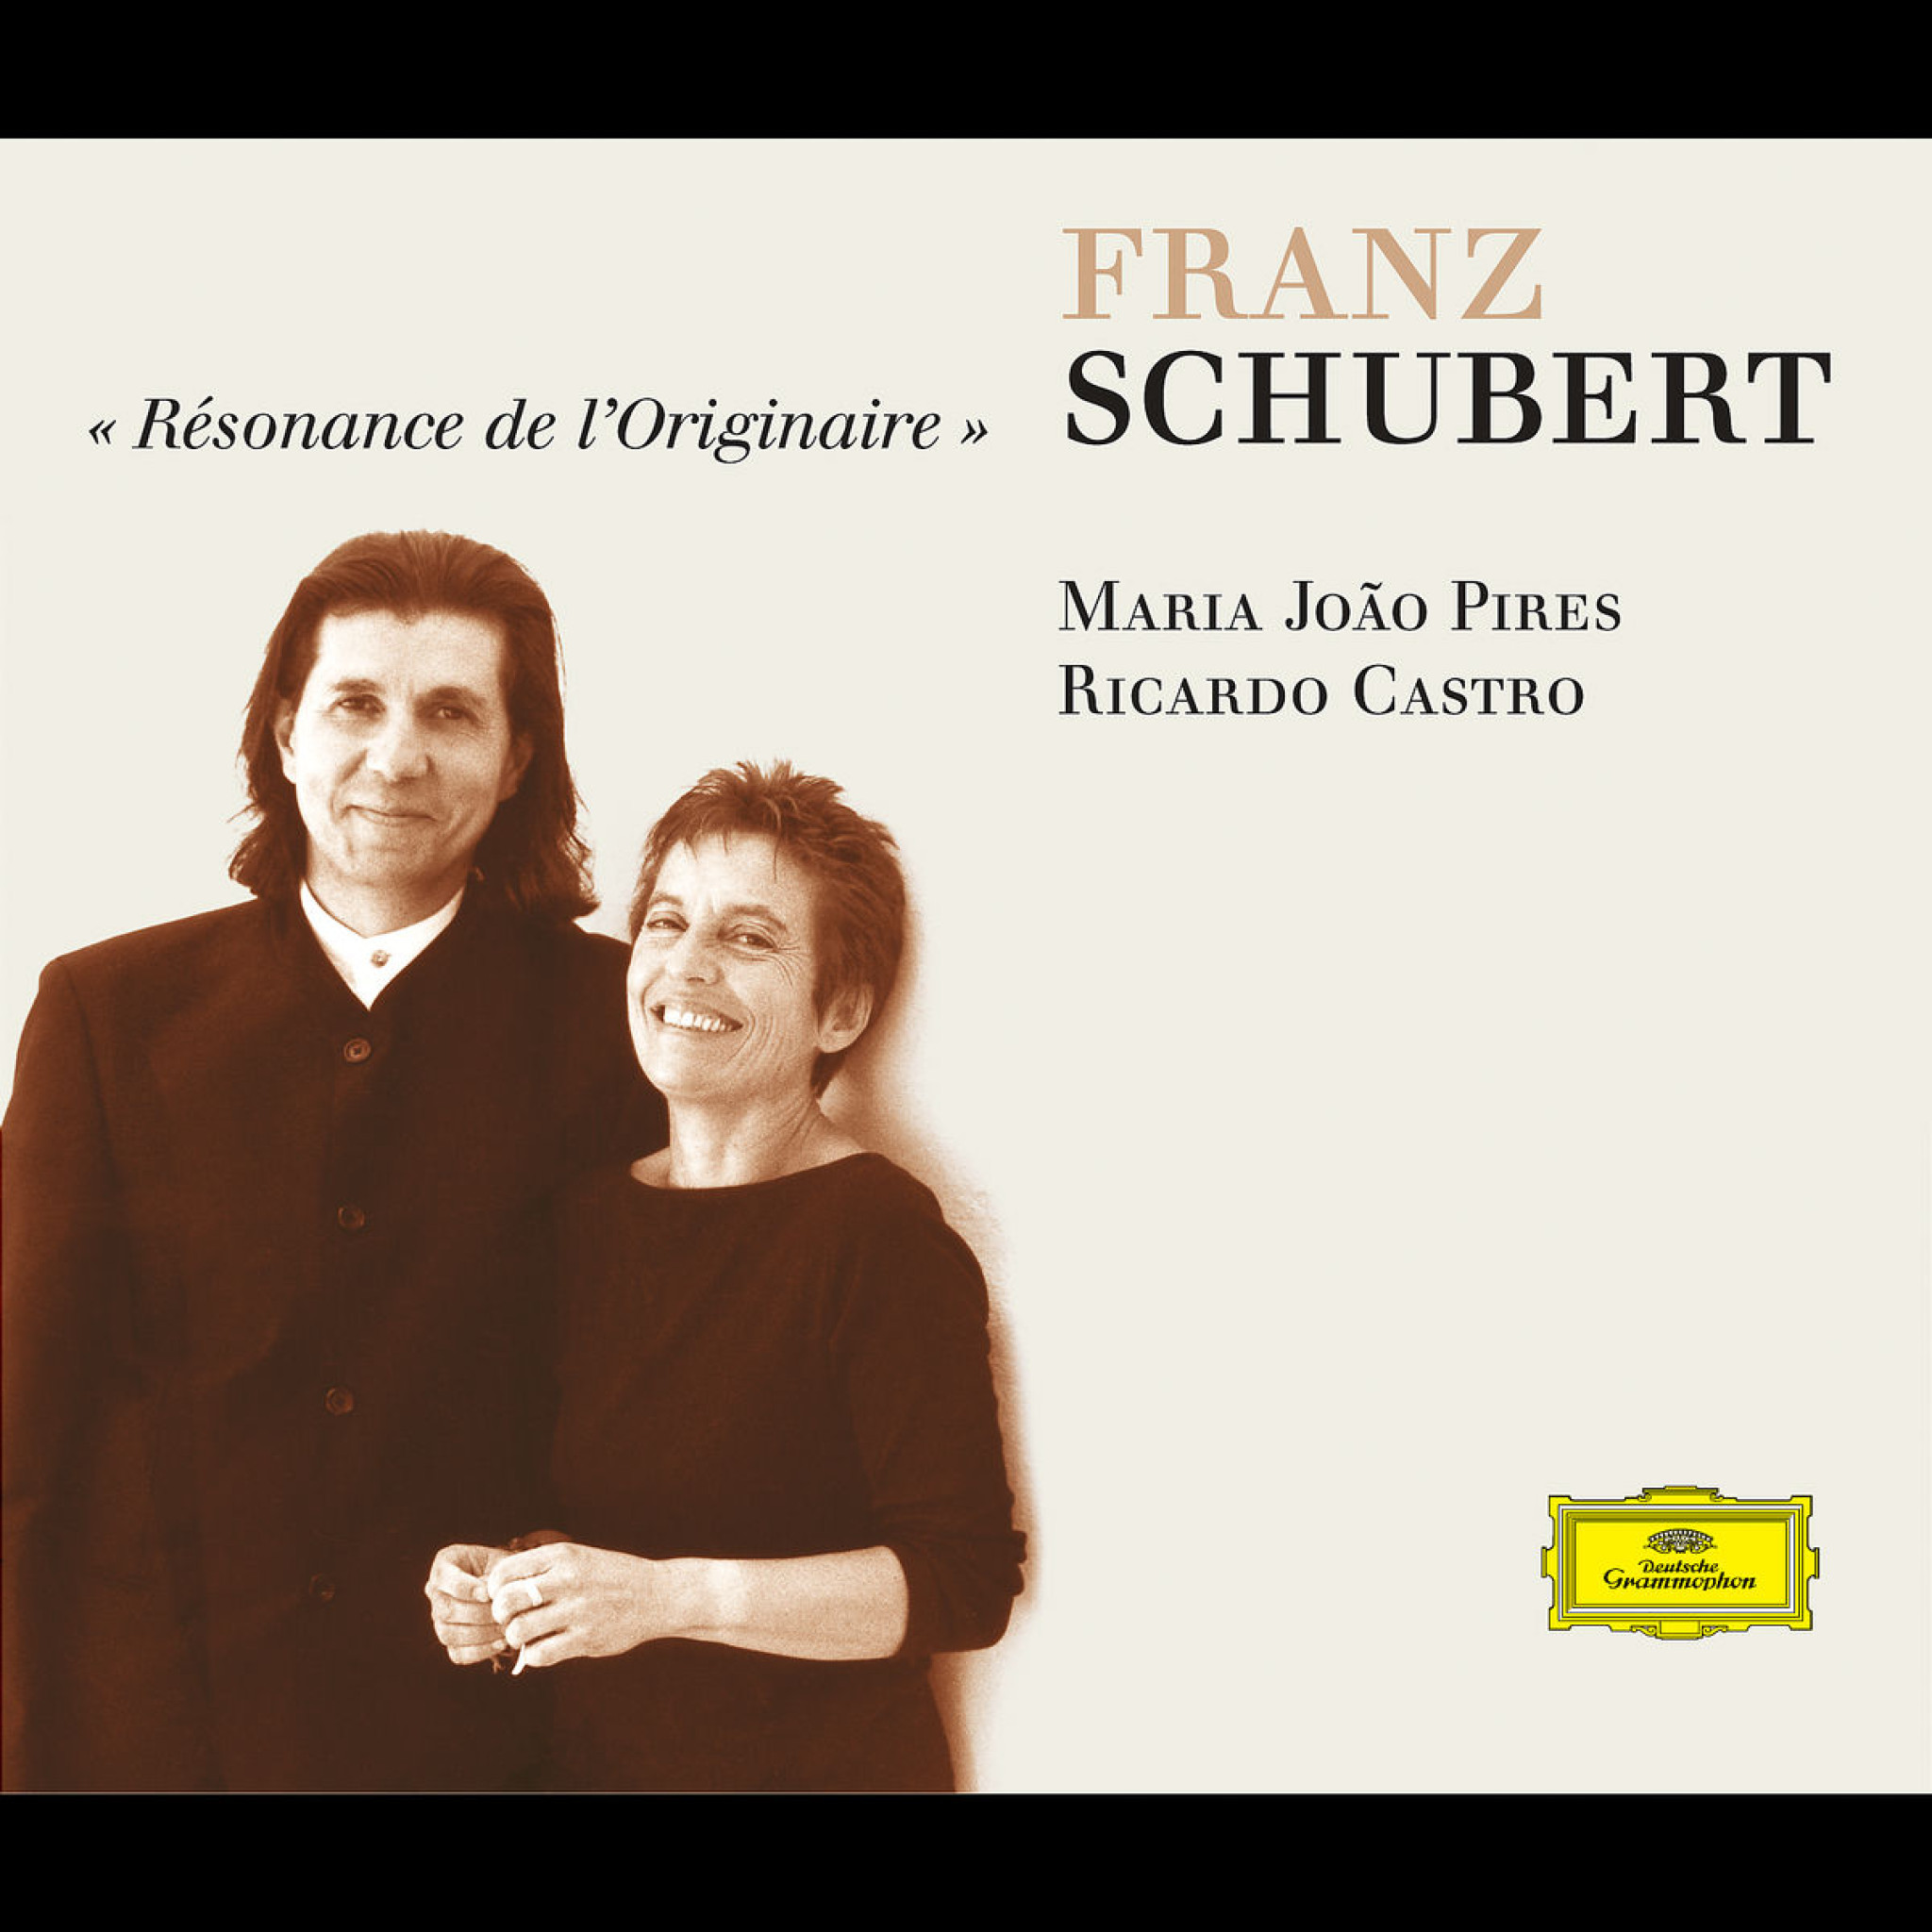 Schubert: Works for Piano Duet and Piano Solo 0028947752332